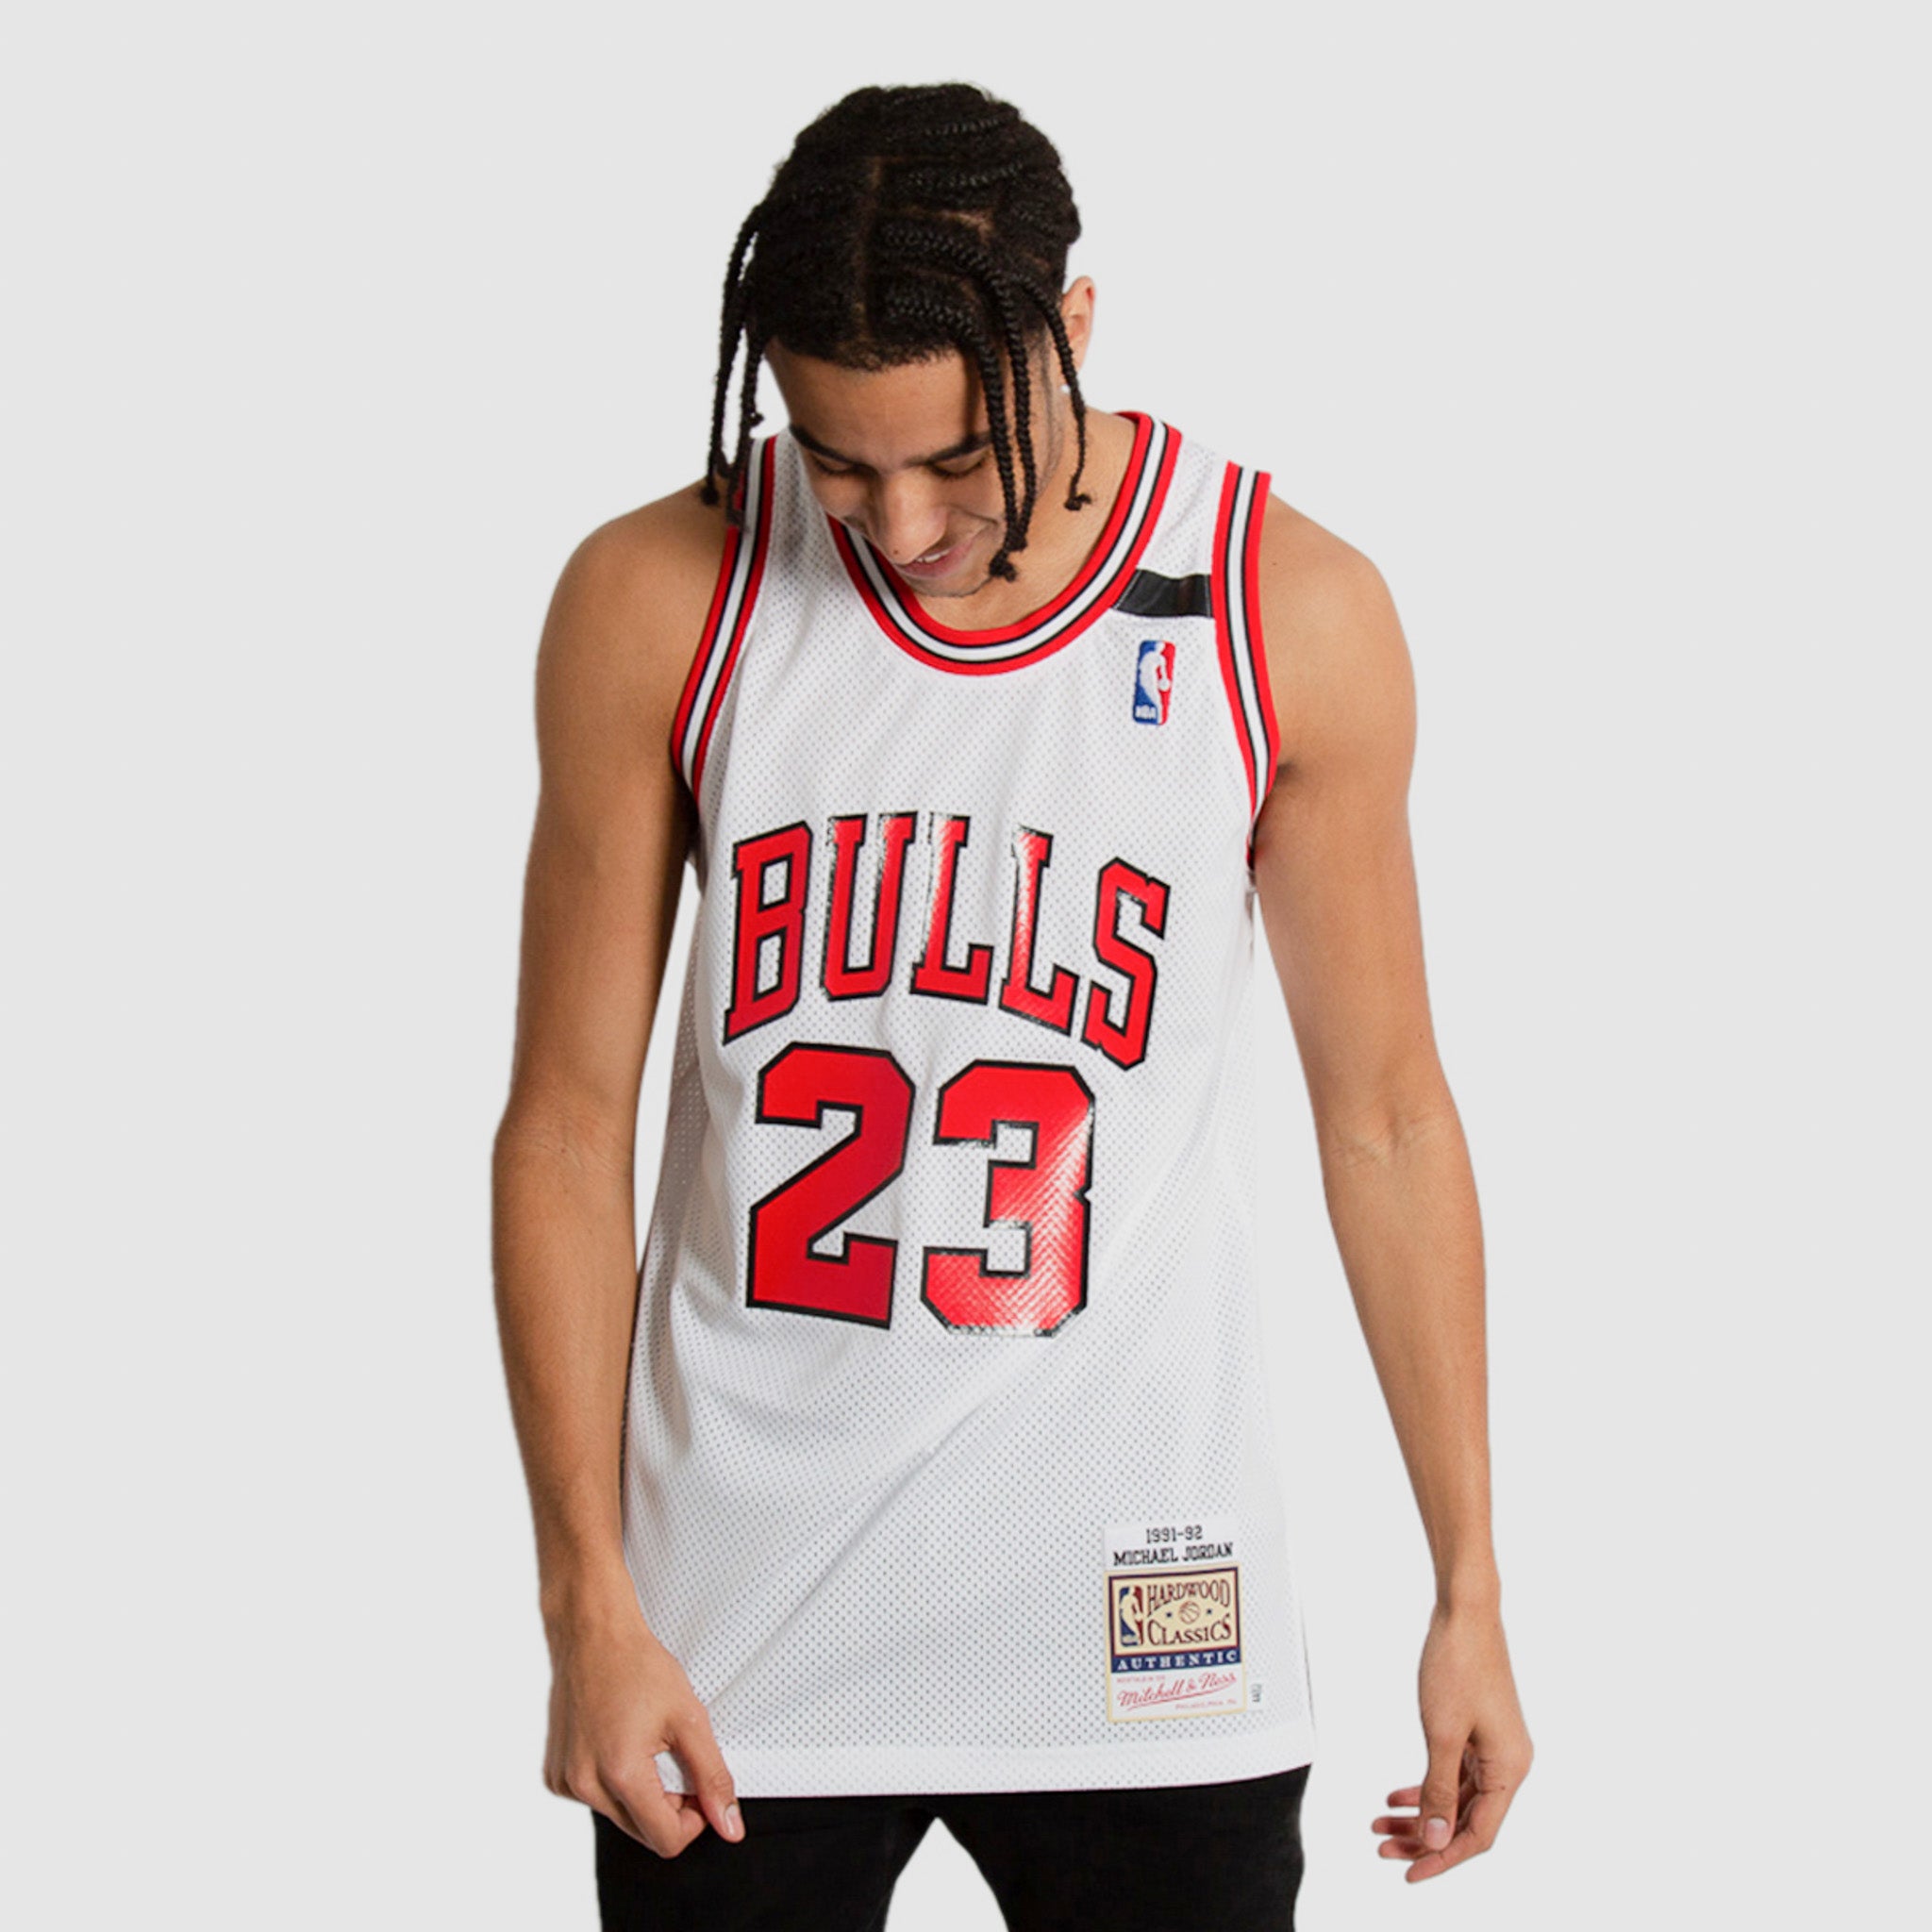 Michael jordan jersey • Compare & see prices now »